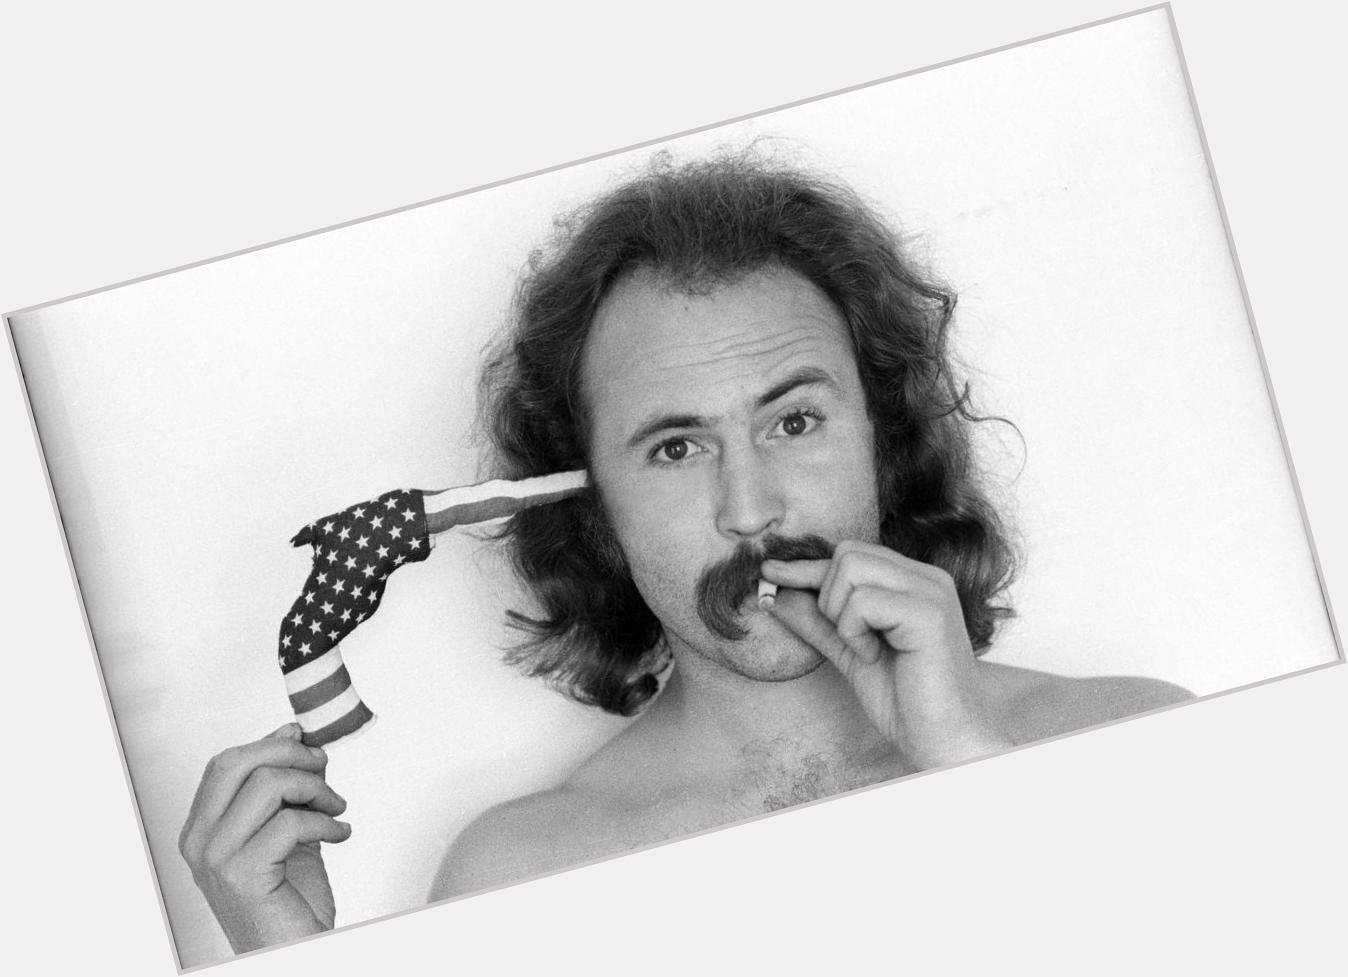 Happy birthday to David Crosby, born on this day 14th Aug 1941, The Byrds, Crosby Stills Nash & Young. 